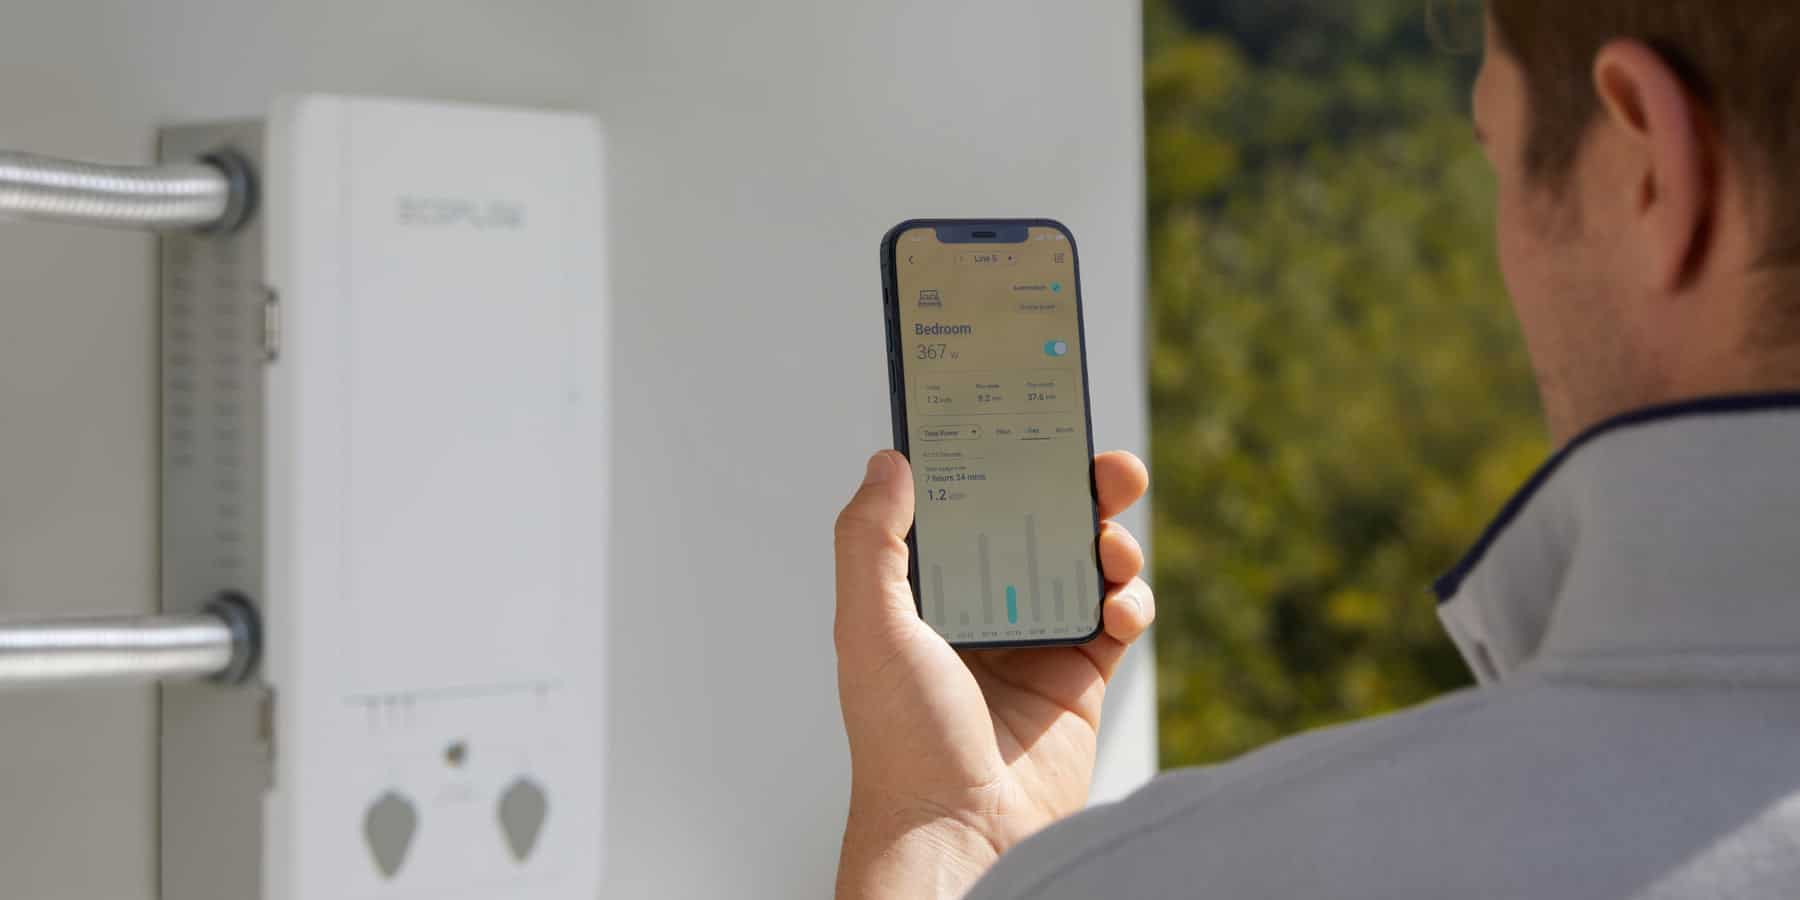 Smart electrical panel with app